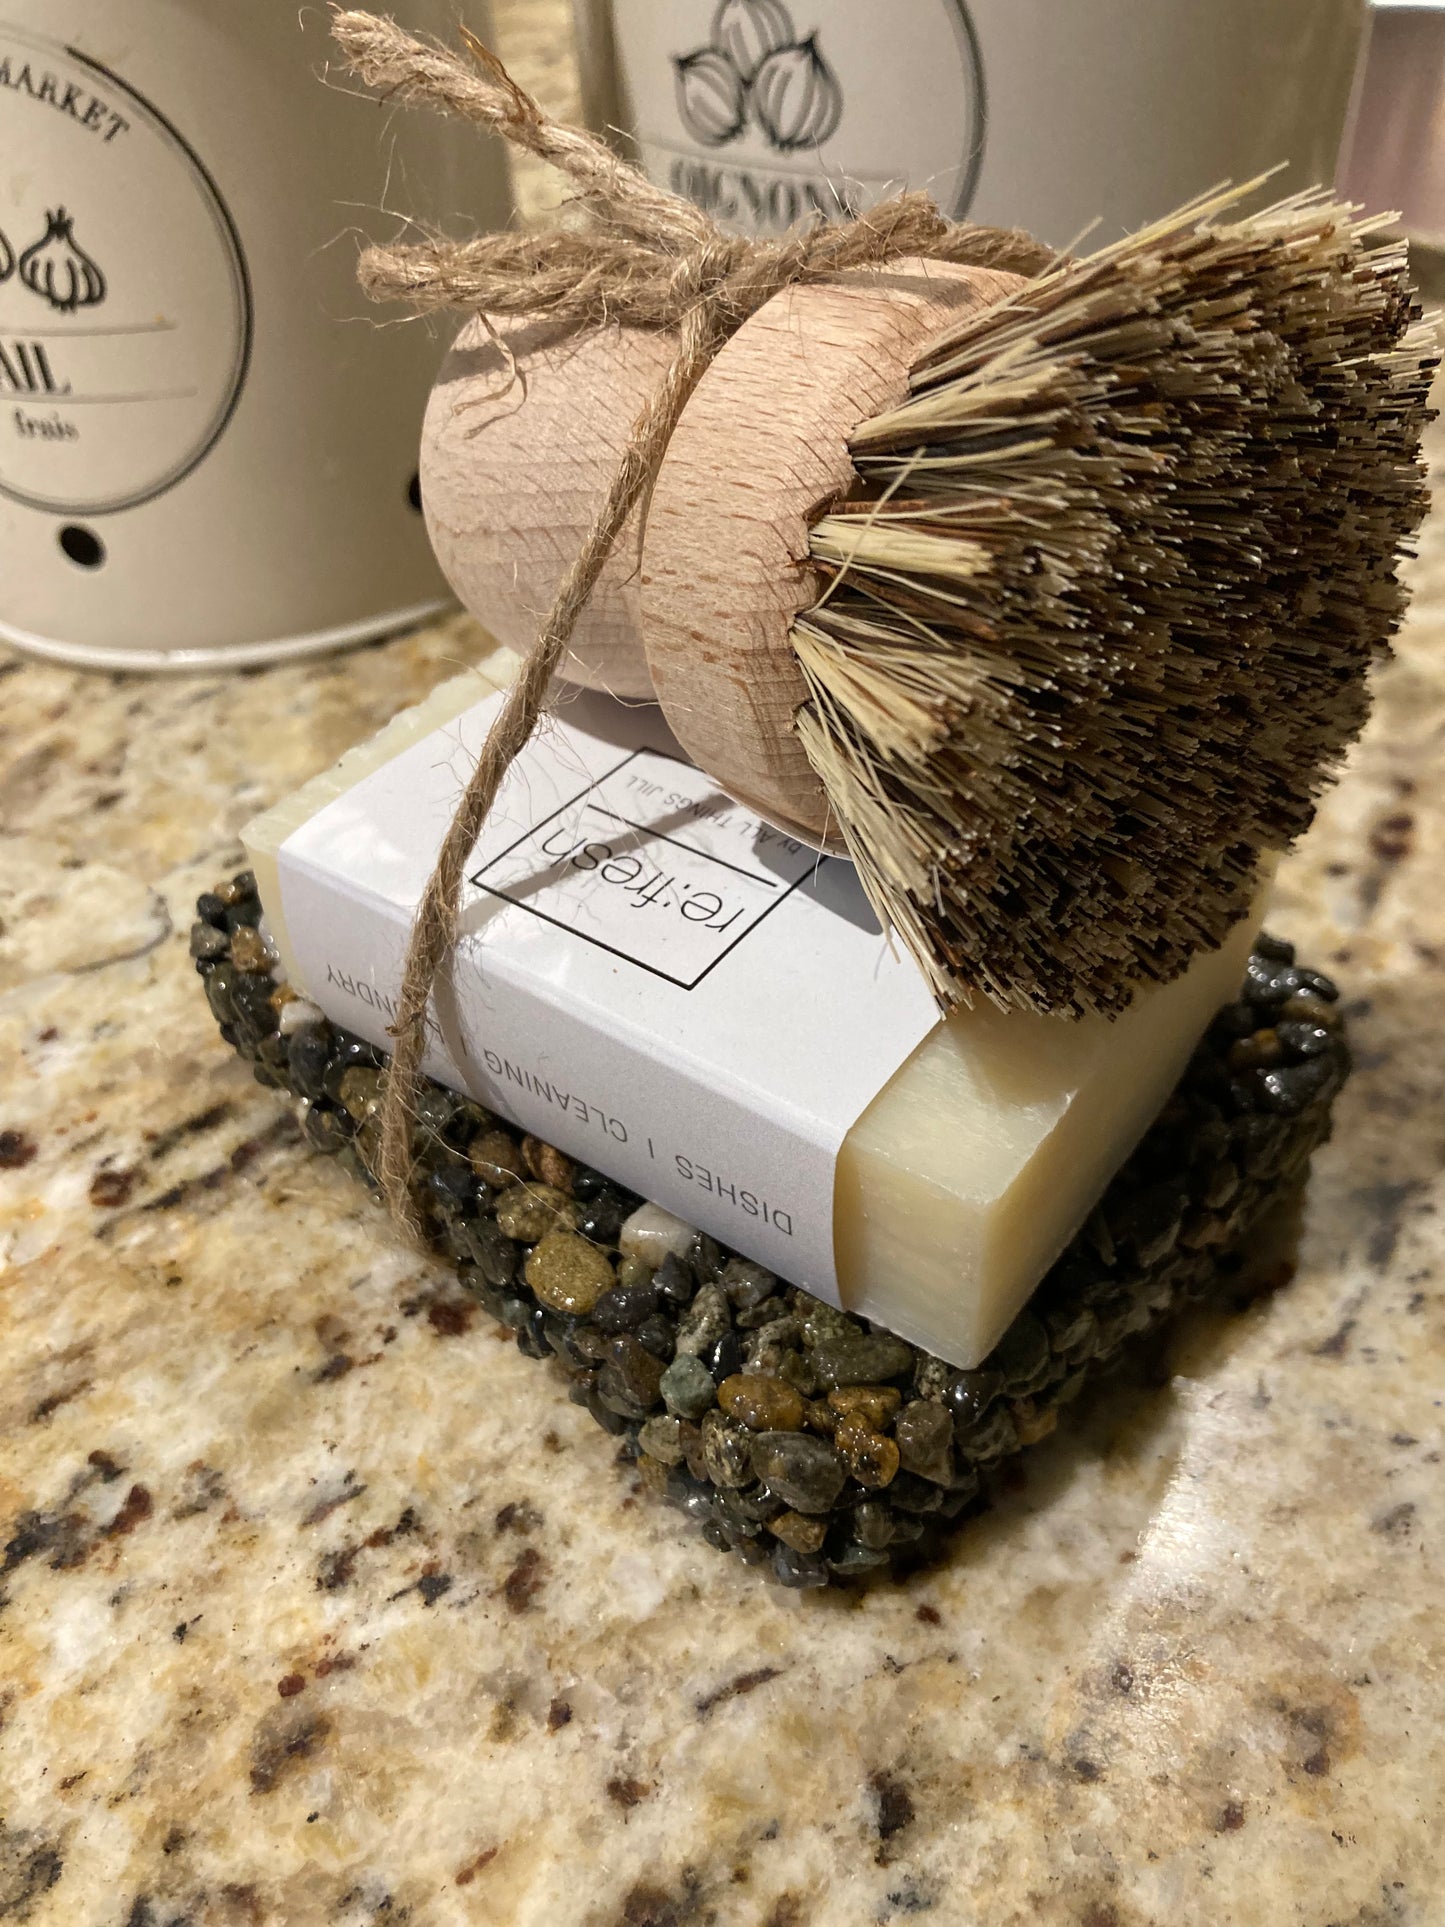 EcoHome - POT SCRUBBER with Bristles